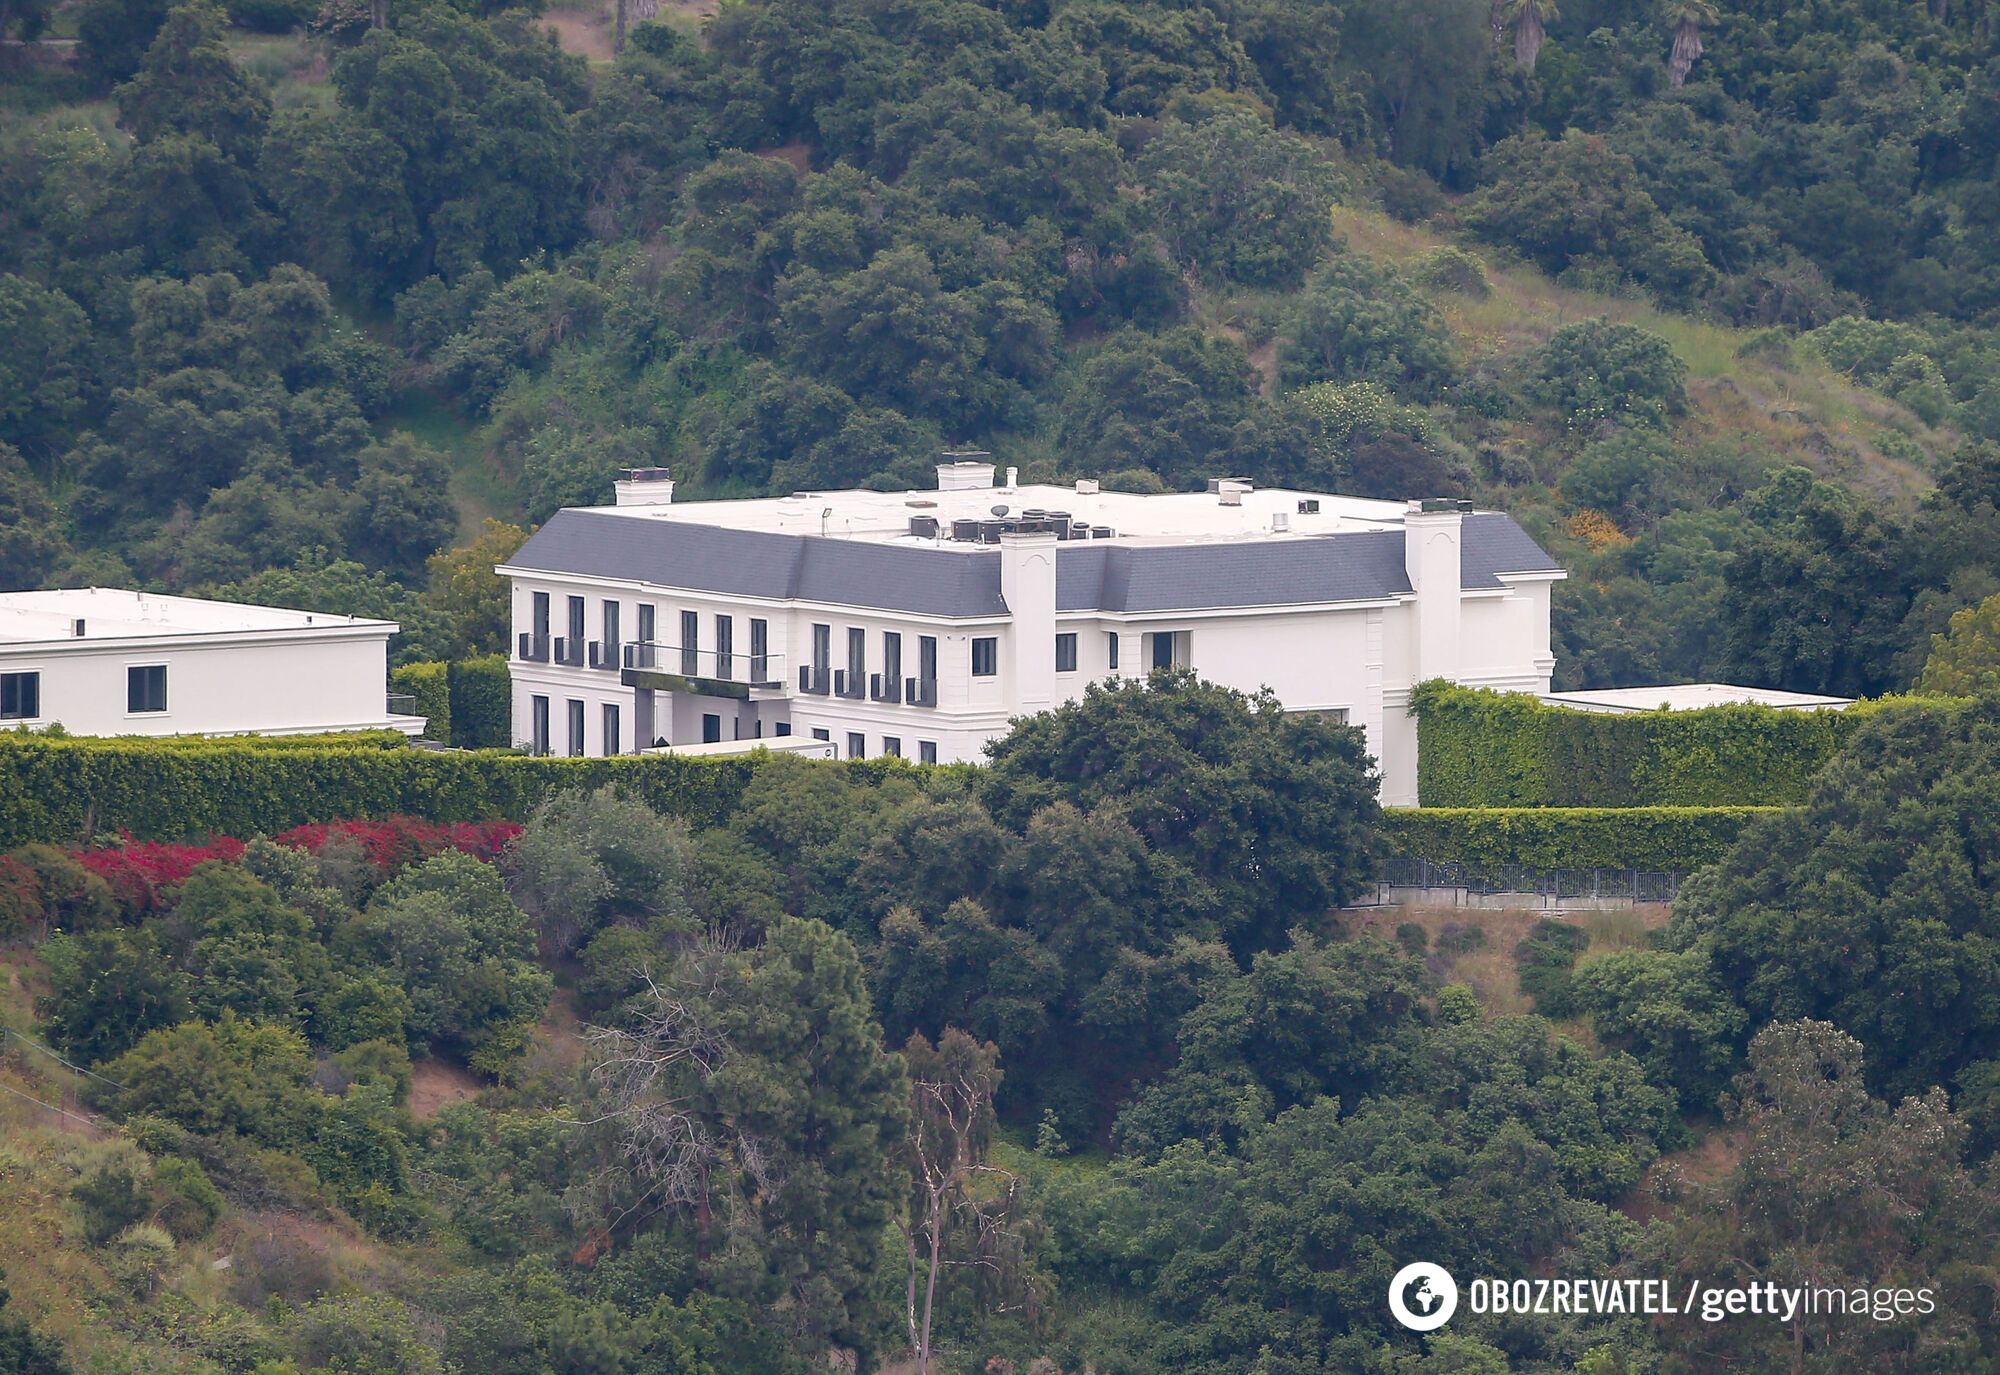 Jennifer Lopez shows her $60 million luxury home where she lives with Ben Affleck. Photo